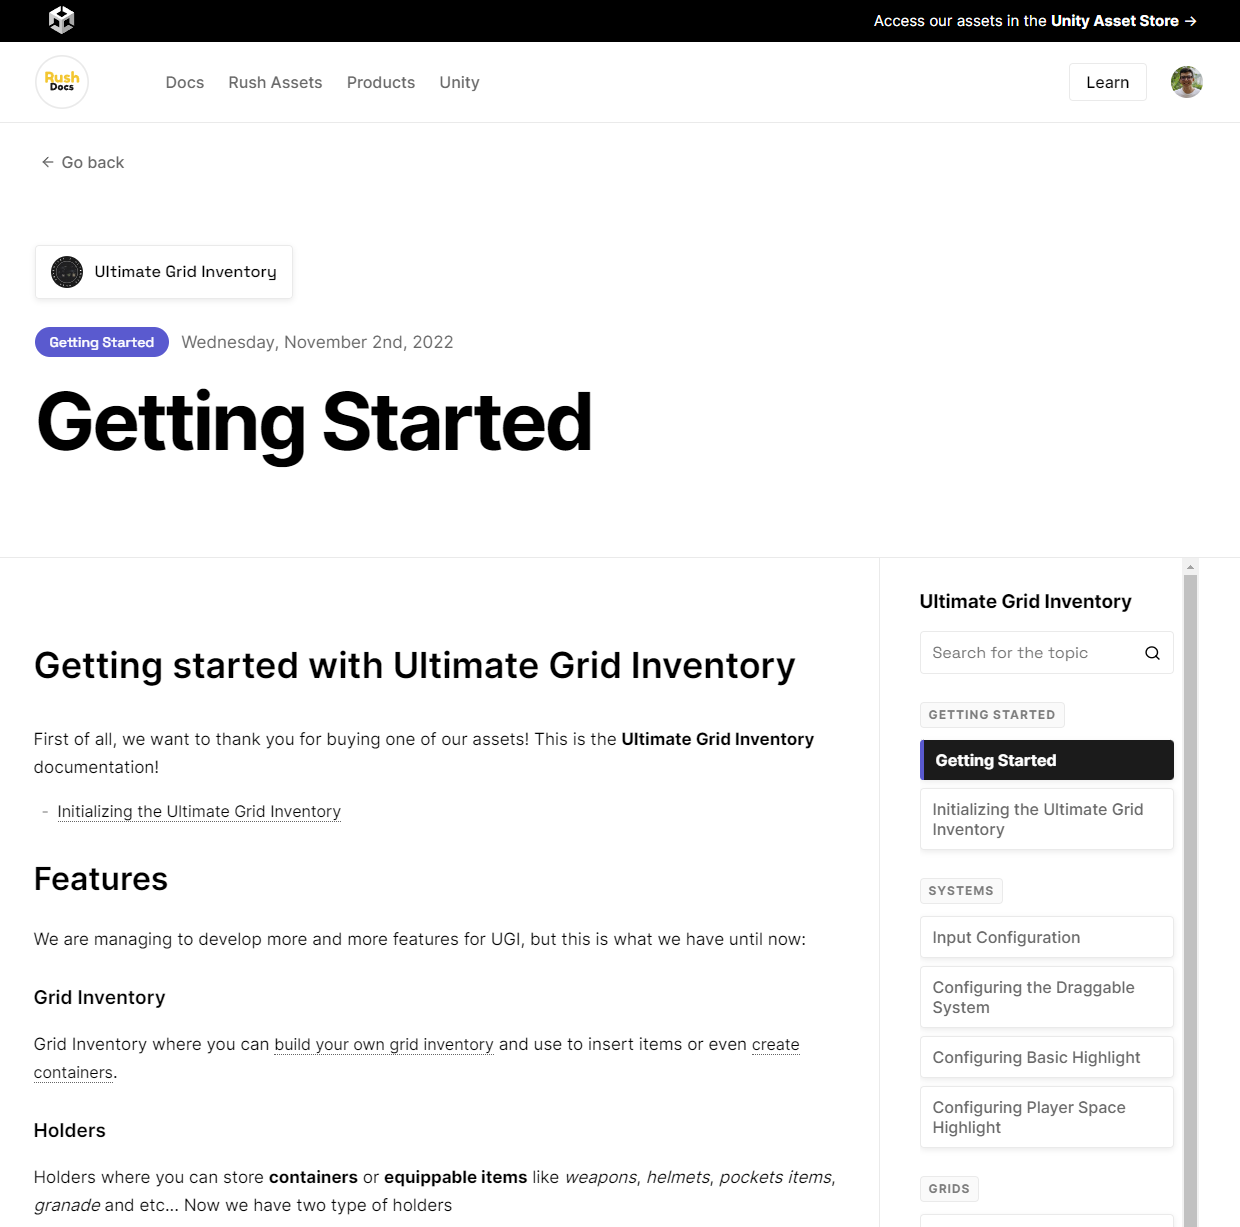 Showing Getting Started Page